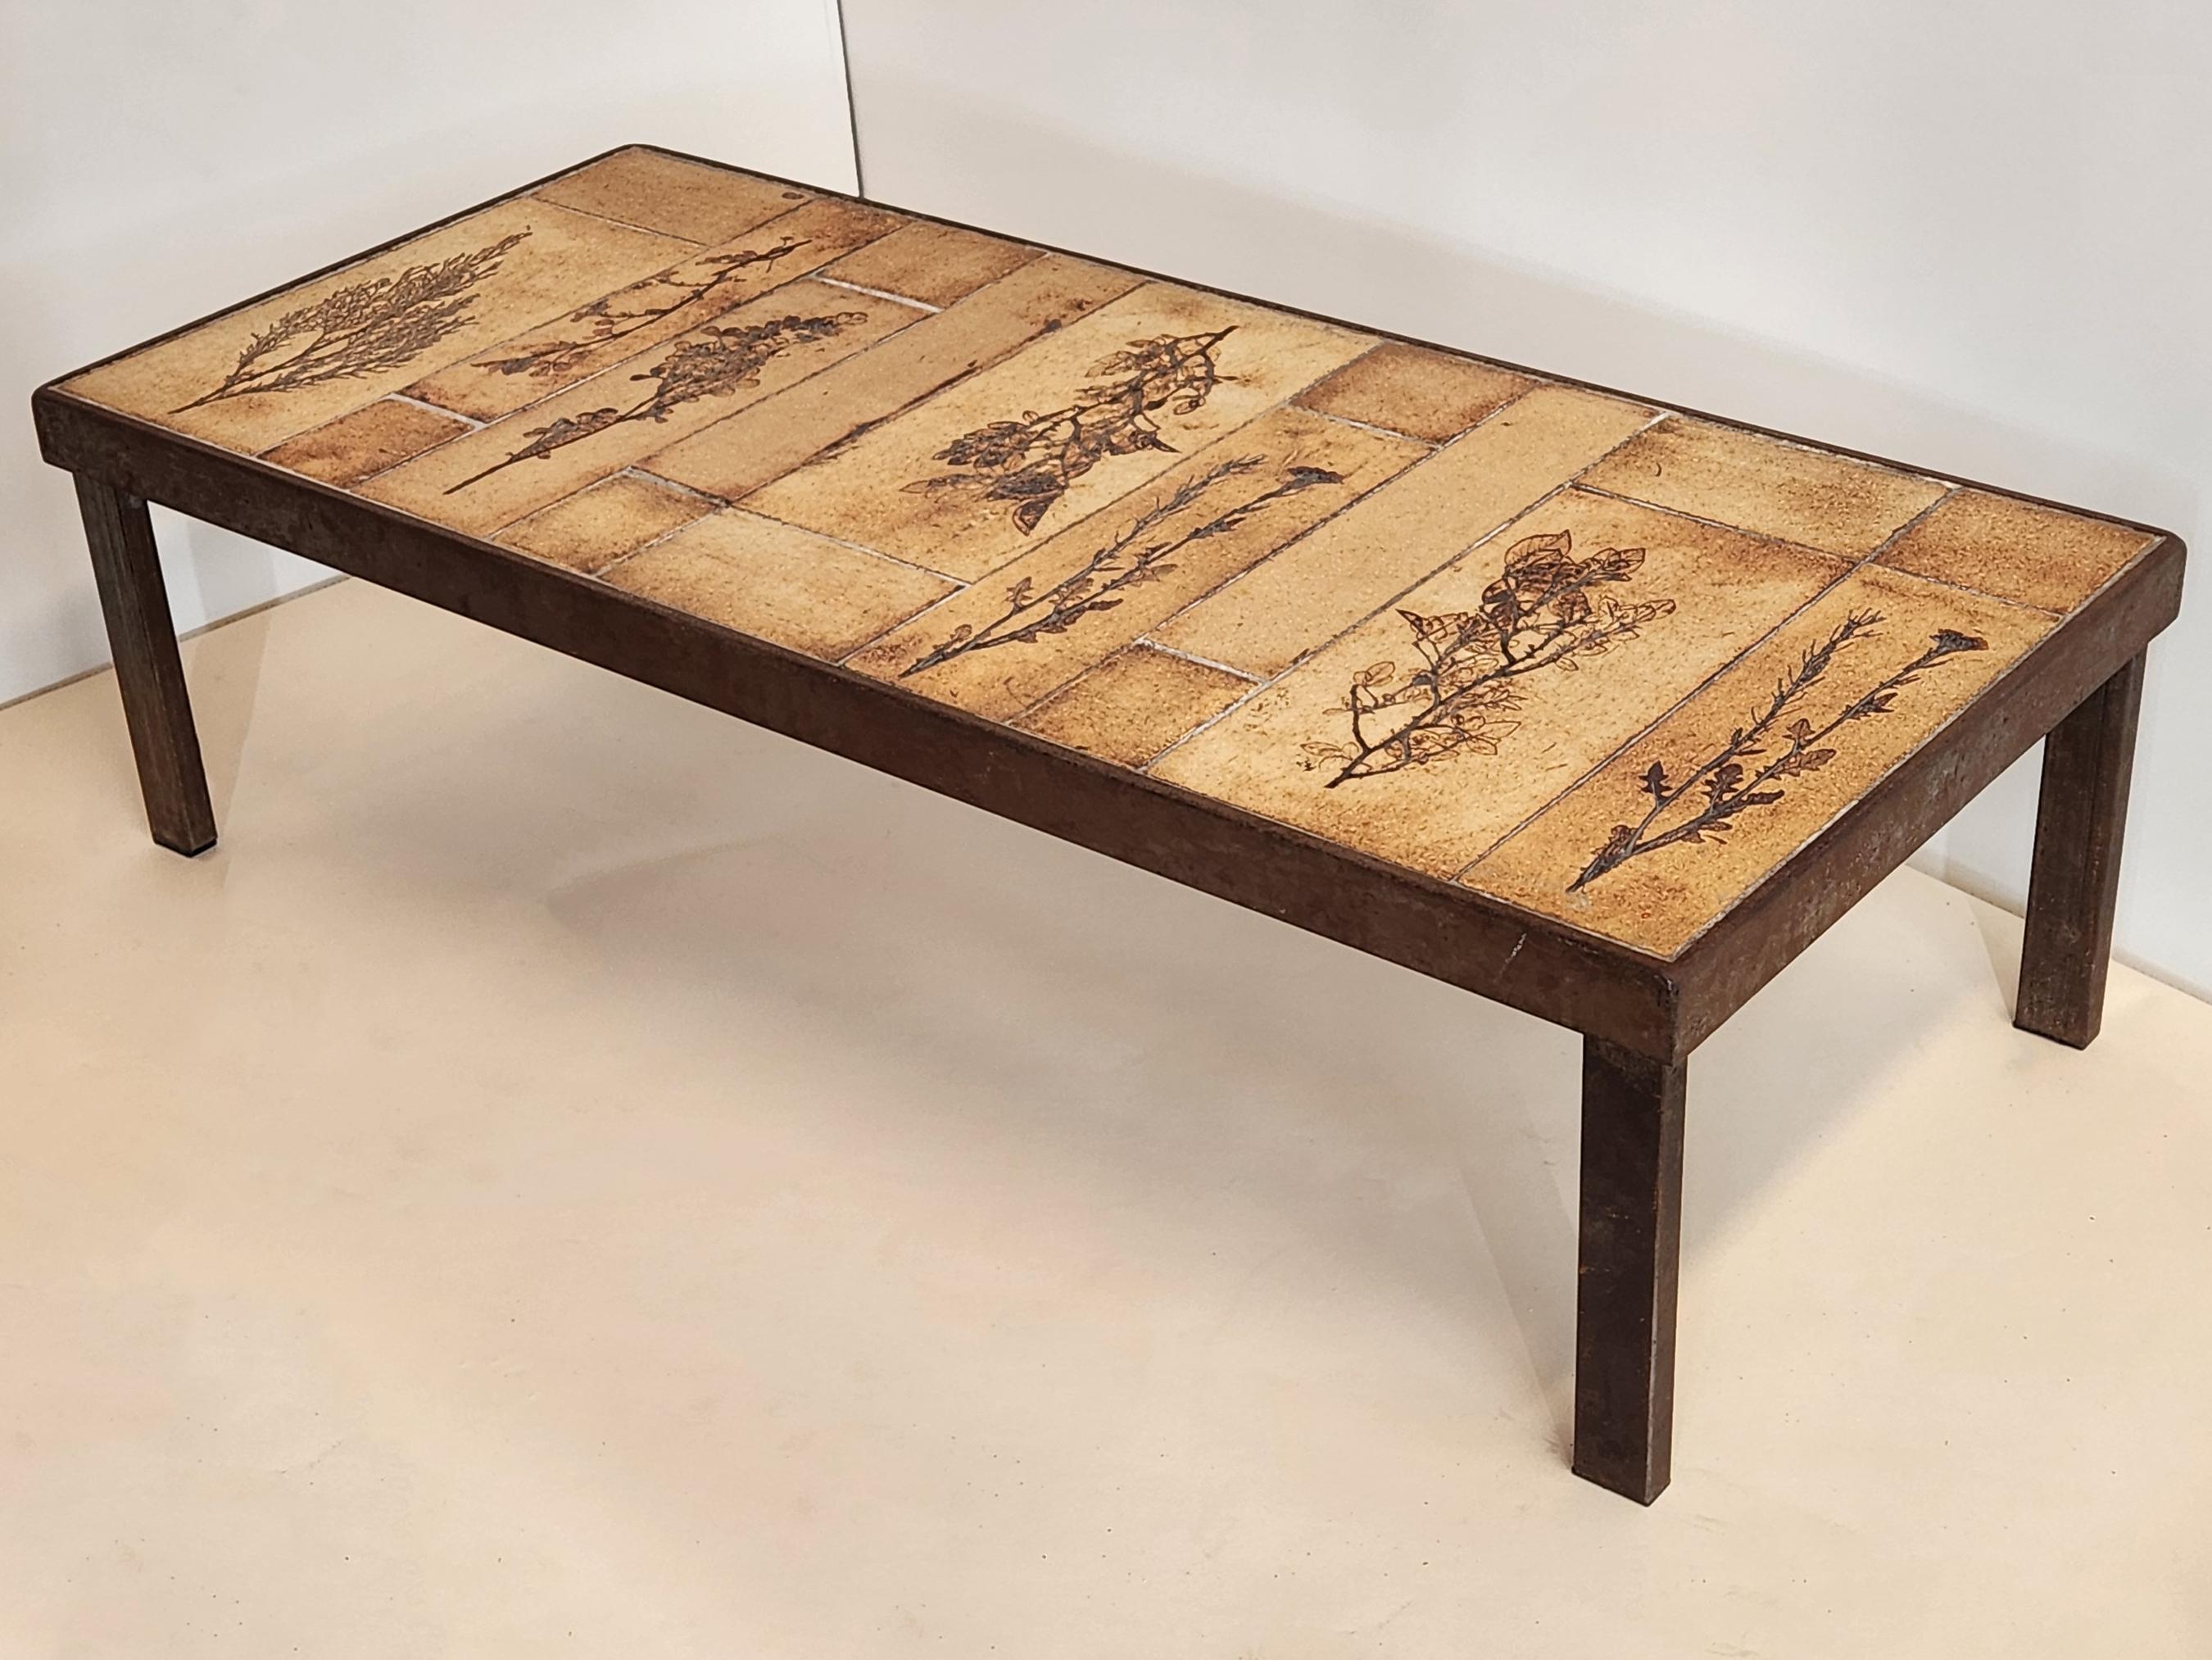 Roger Capron - Coffee Table, Garrigue Ceramic Tiles on Dovetail Metal Frame For Sale